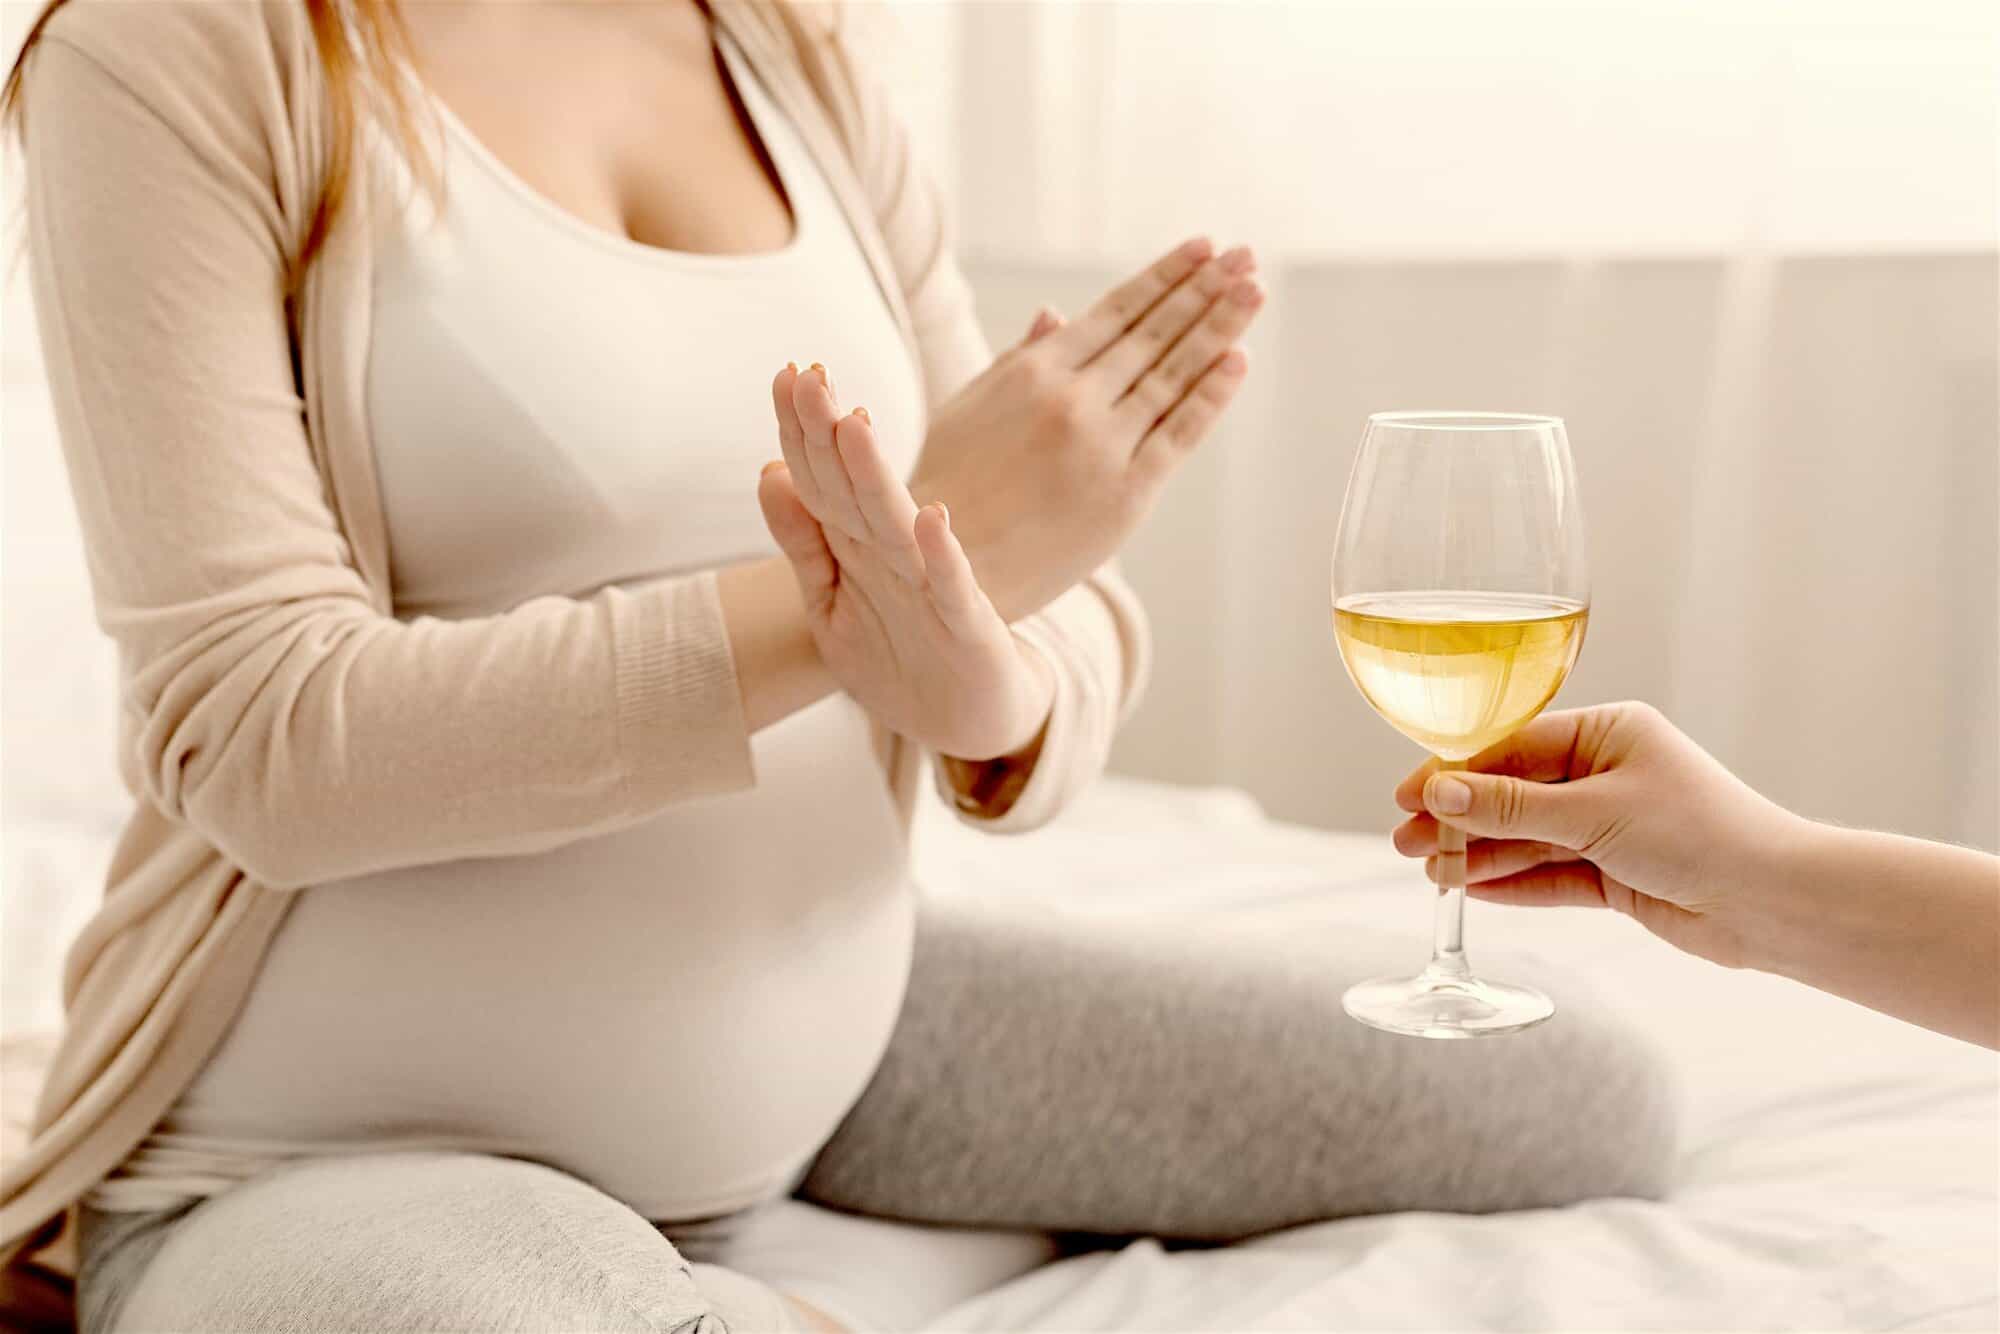 Alcohol Prohibited. Pregnant Woman With Crossed Hands Refusing To Drink Wine, Making Denying Gesture